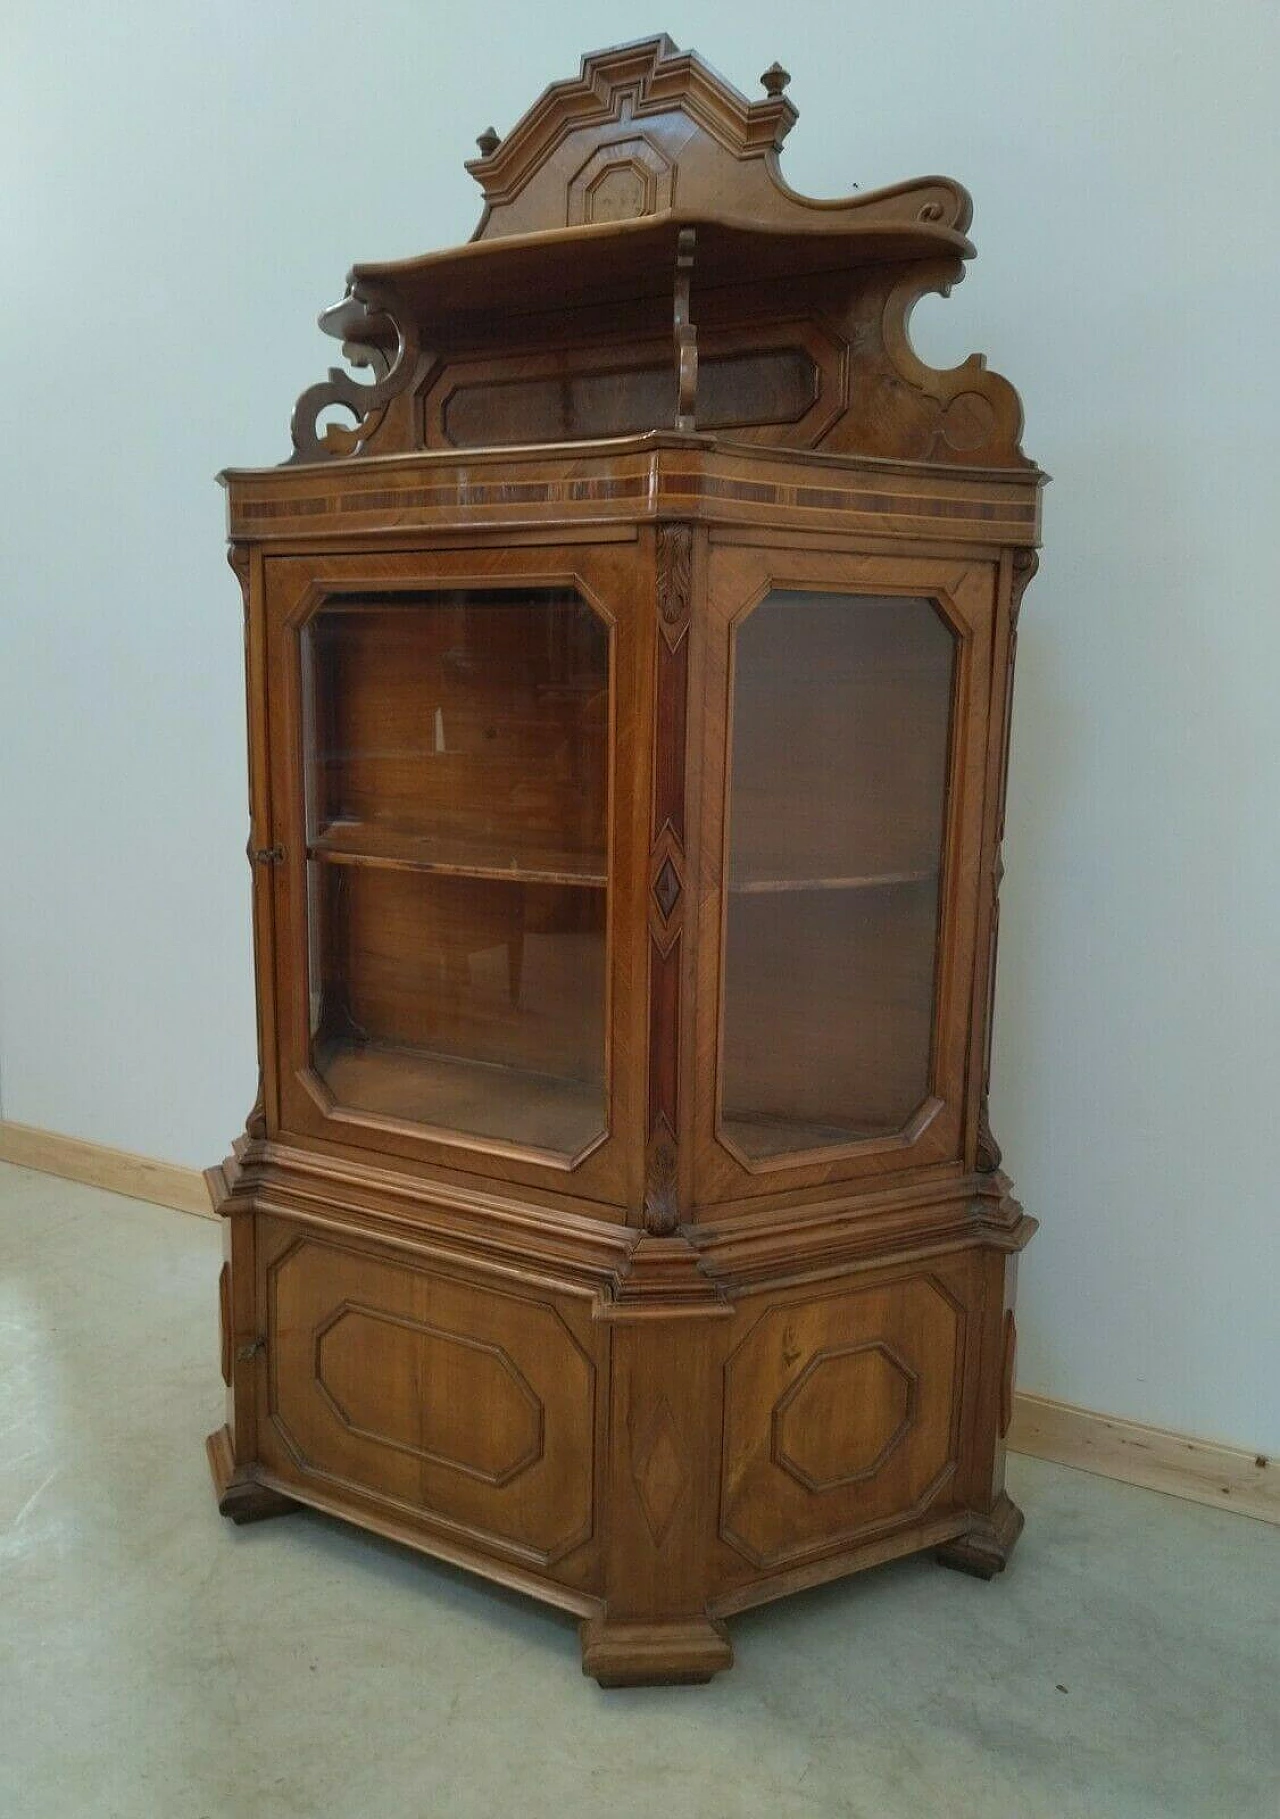 Two-part display case in walnut, spruce and glass, 19th century 1477115